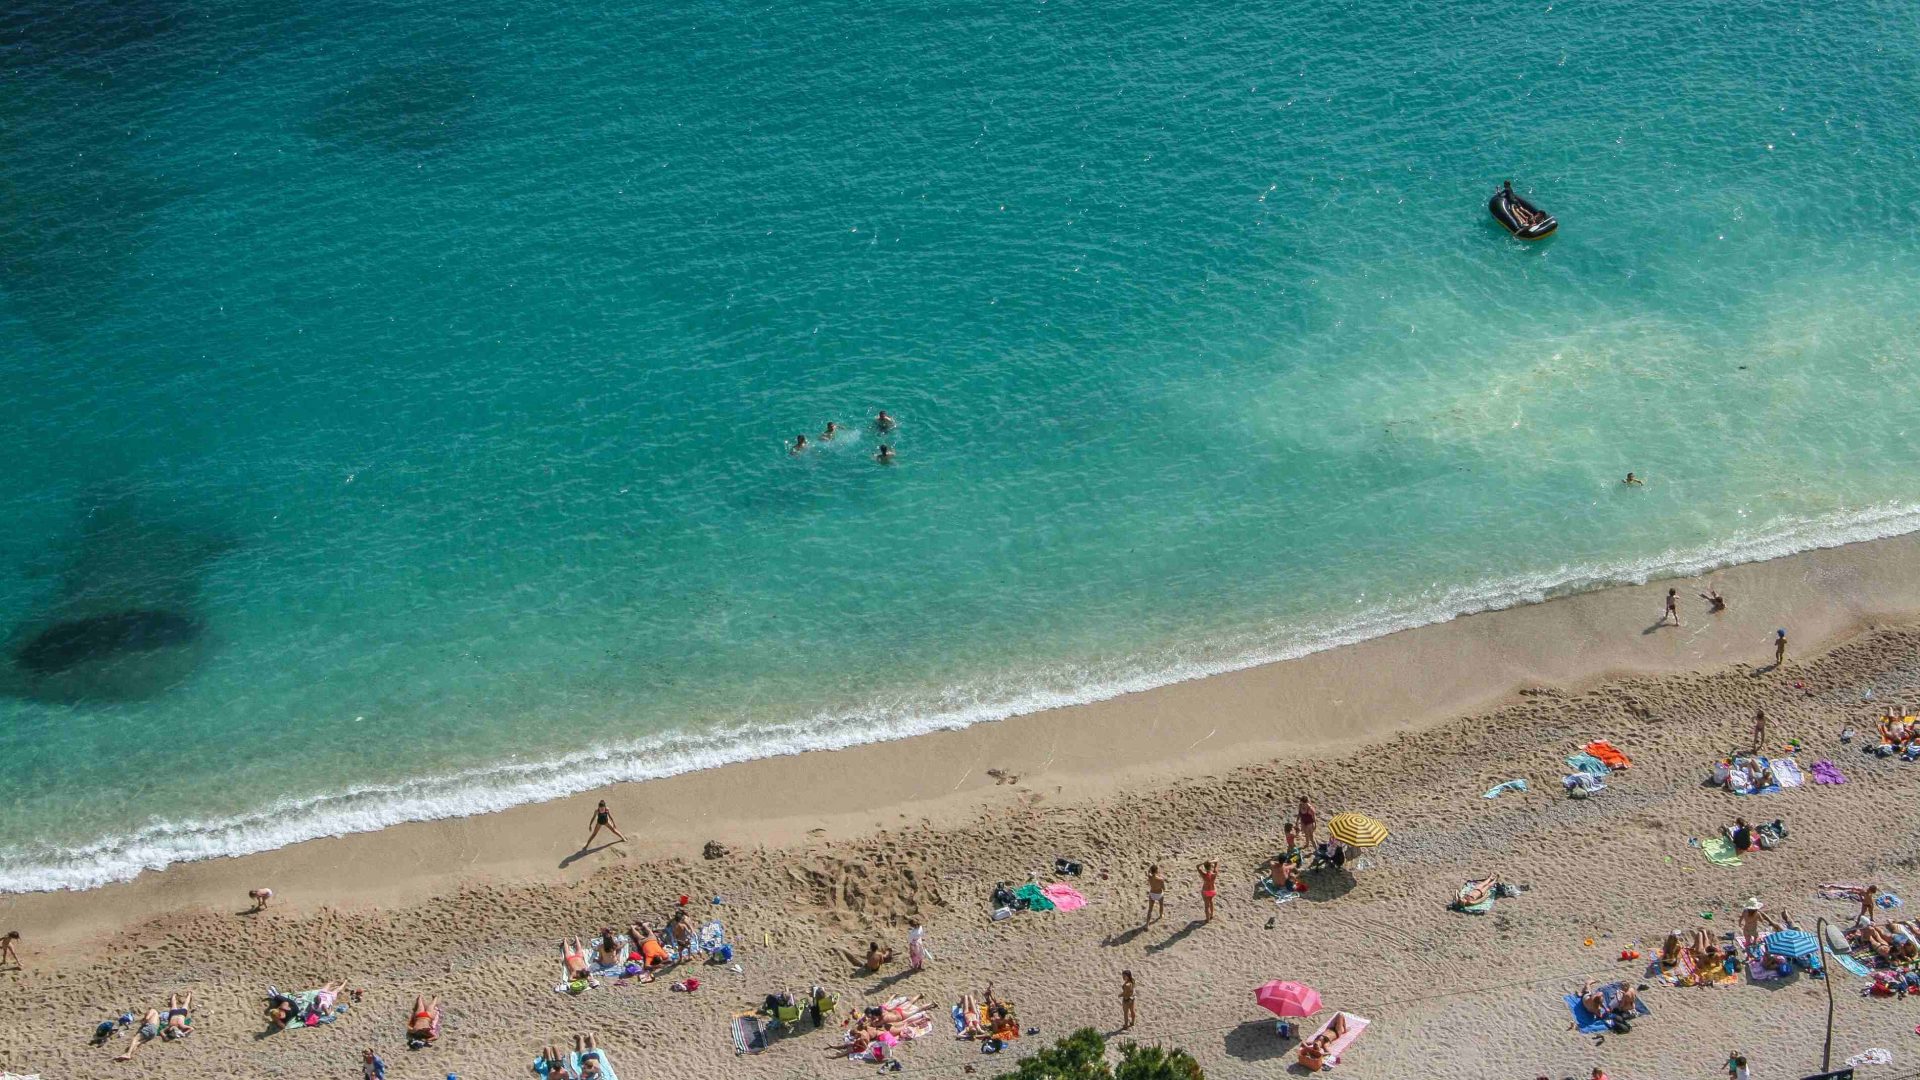 Tourists flock to the Mediterranean as if the climate crisis isn’t happening. This year’s heat and fire will force change